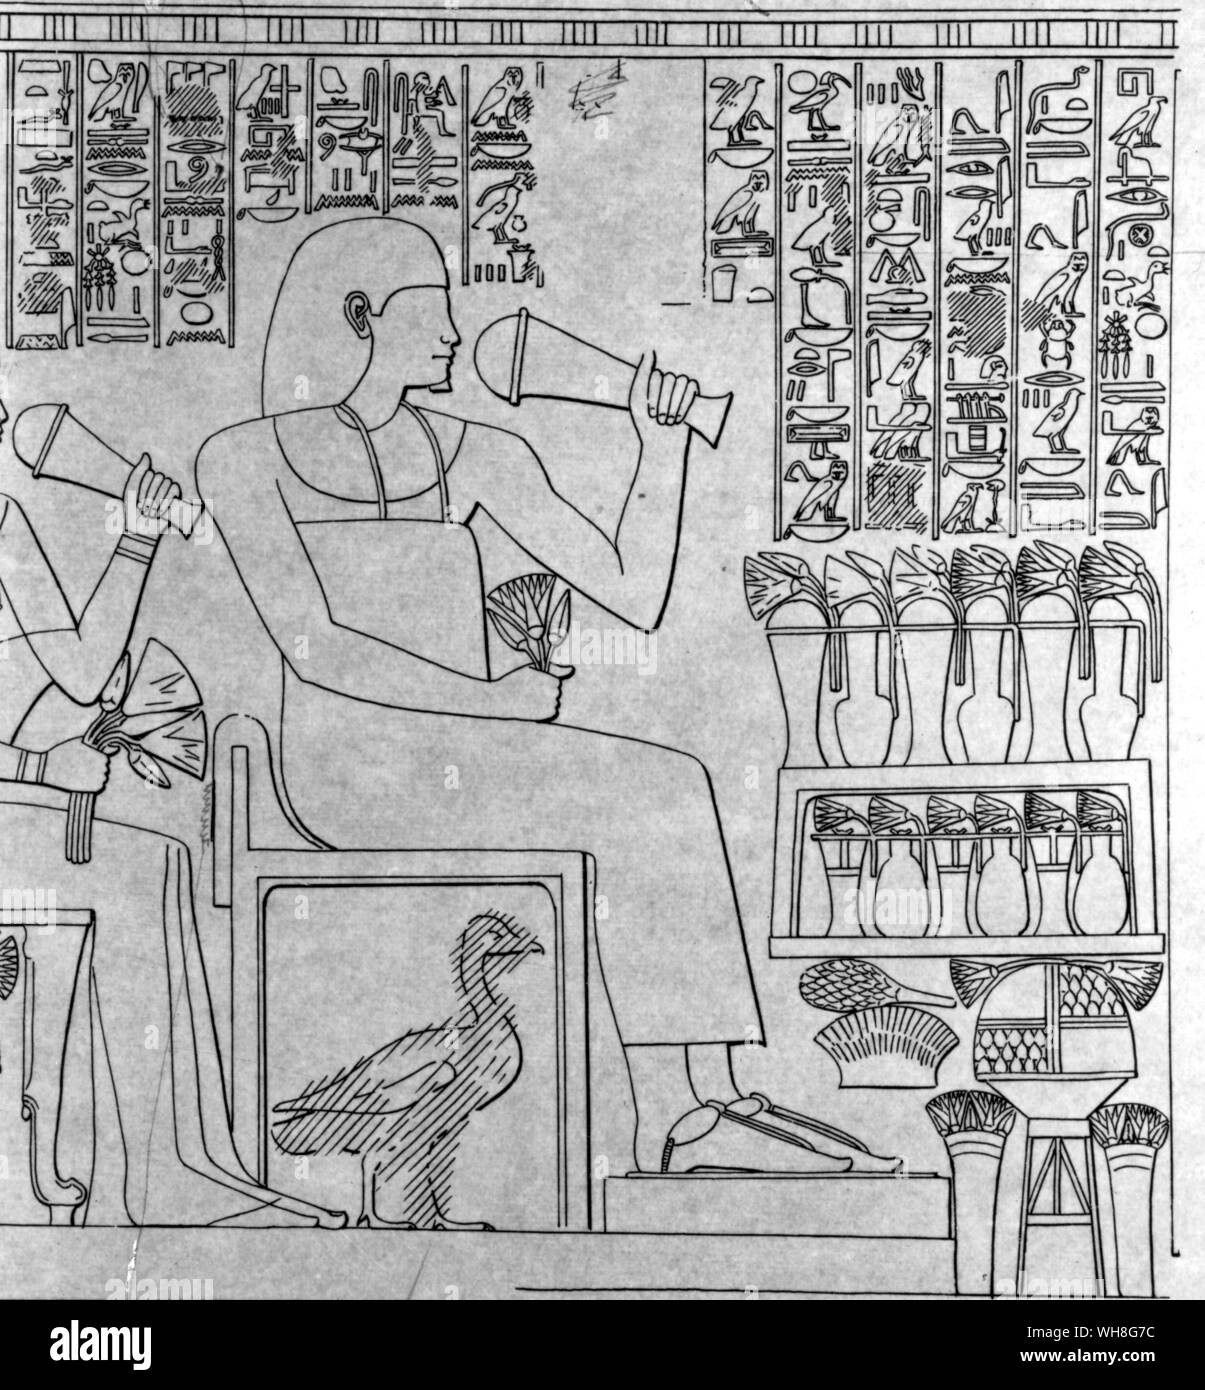 The sacred goose of Amun effaced from beneath the seat of the vizier at Thebes at the time of the Amarnan heresy (Theban tomb of Ramose). Tutankhamen by Christiane Desroches Noblecourt, page 157.. Amun (also spelt Amon, Amoun, Amen, and rarely Imenand, and spelt in Greek as Ammon, and Hammon) was the name of a deity, in Egyptian mythology, who gradually rose to become one of the most important, before disappearing back into the shadows. Stock Photo